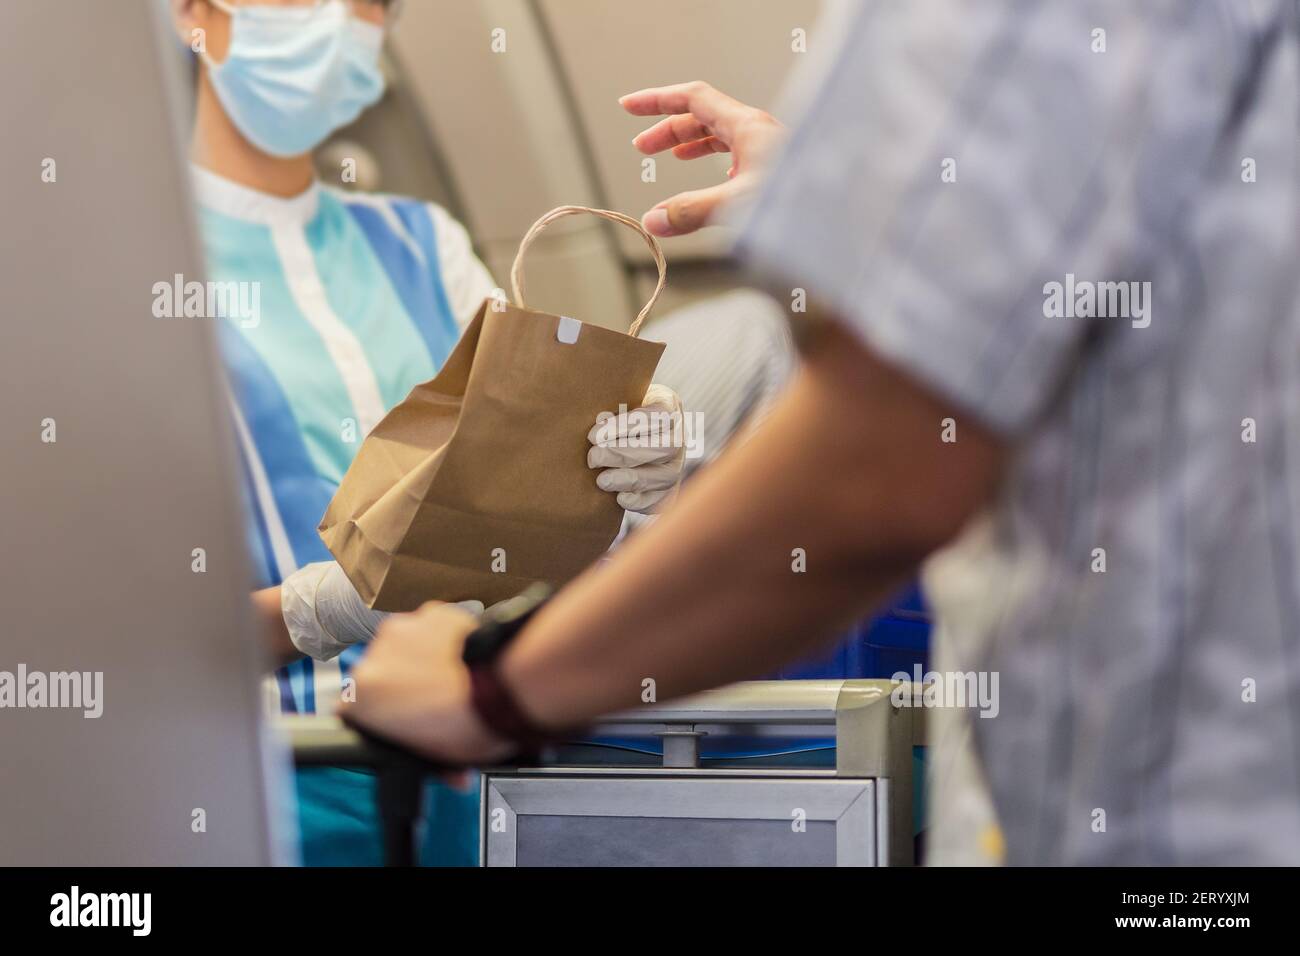 Flight attendant in face mask with gloves giving meals to the passenger travel bubble. Stock Photo